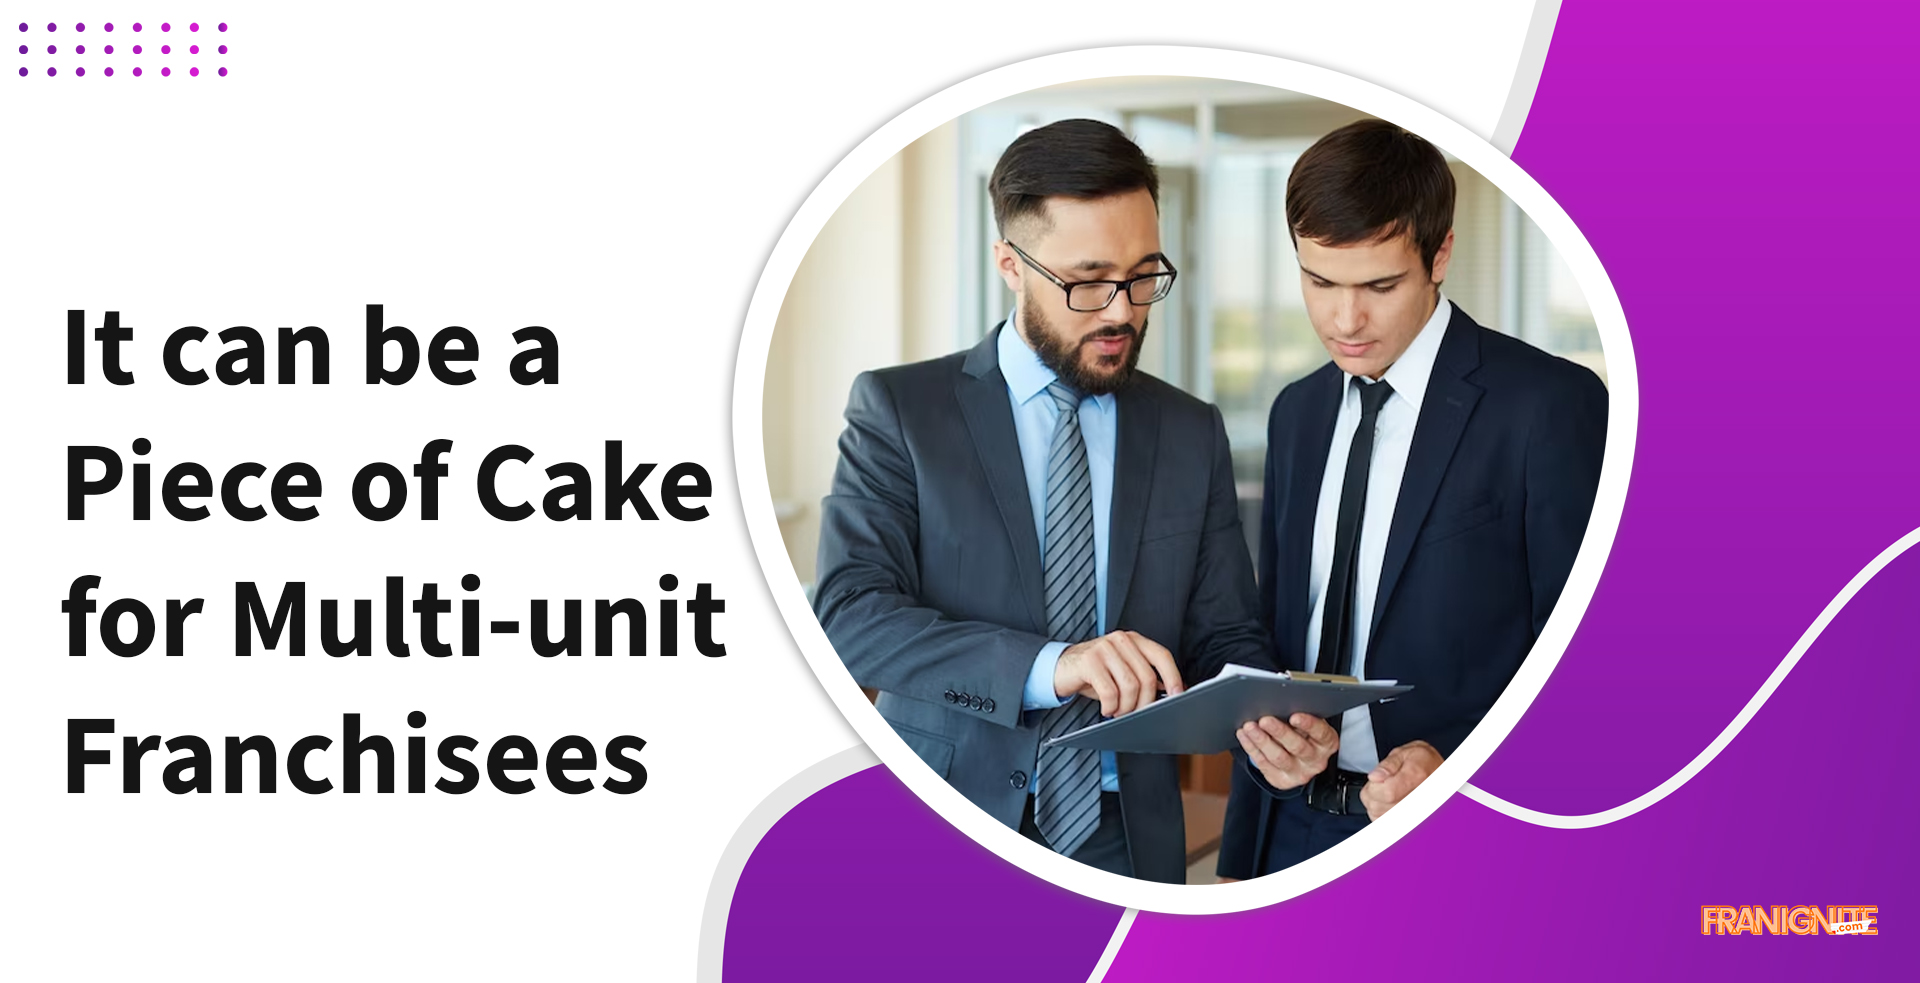 It can be a Piece of Cake for Multi-unit Franchisees